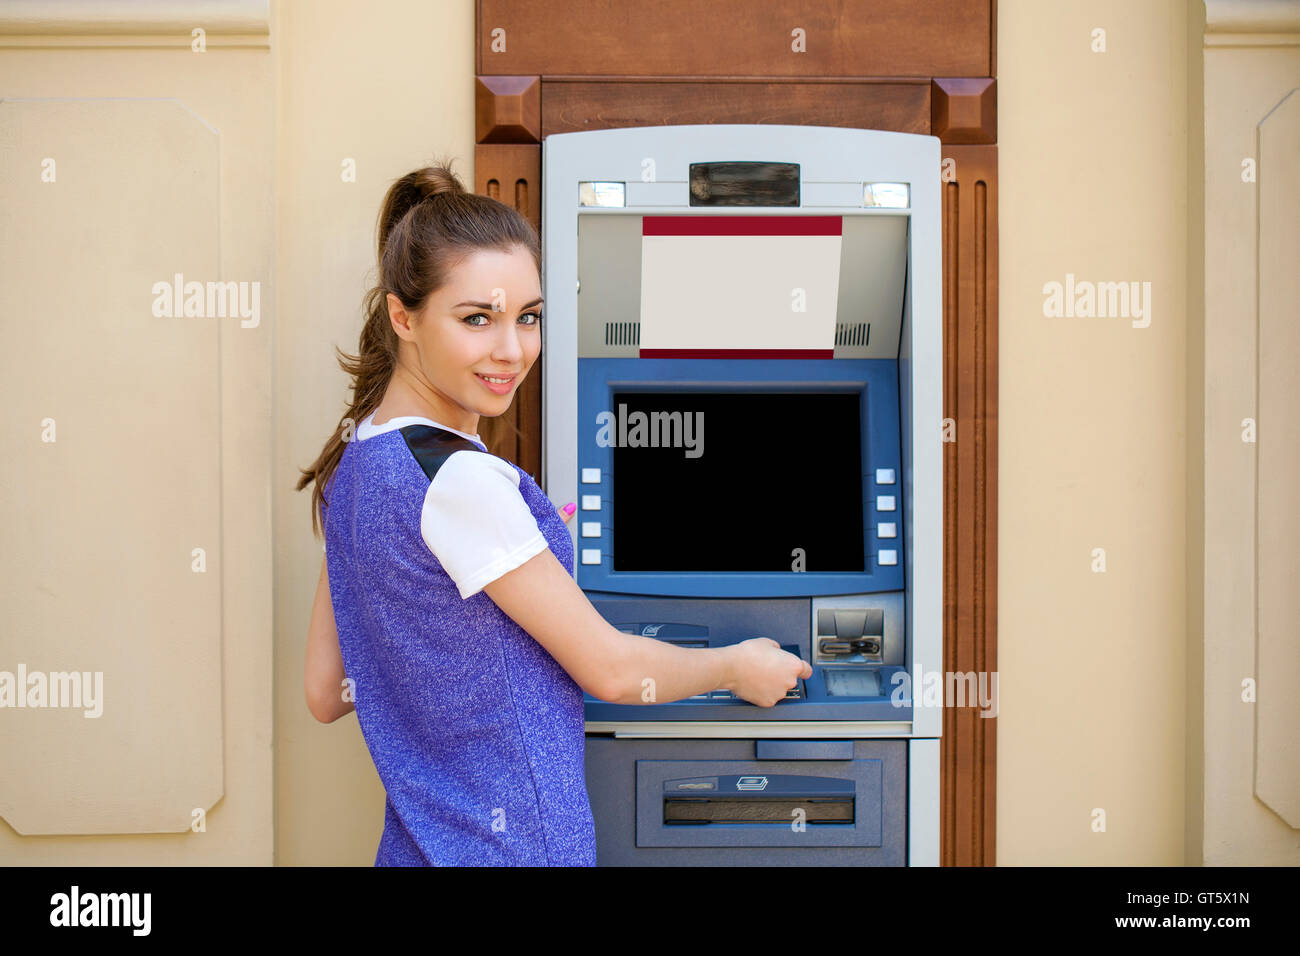 Brunette young lady using an automated teller machine. Woman withdrawing money or checking account balance Stock Photo